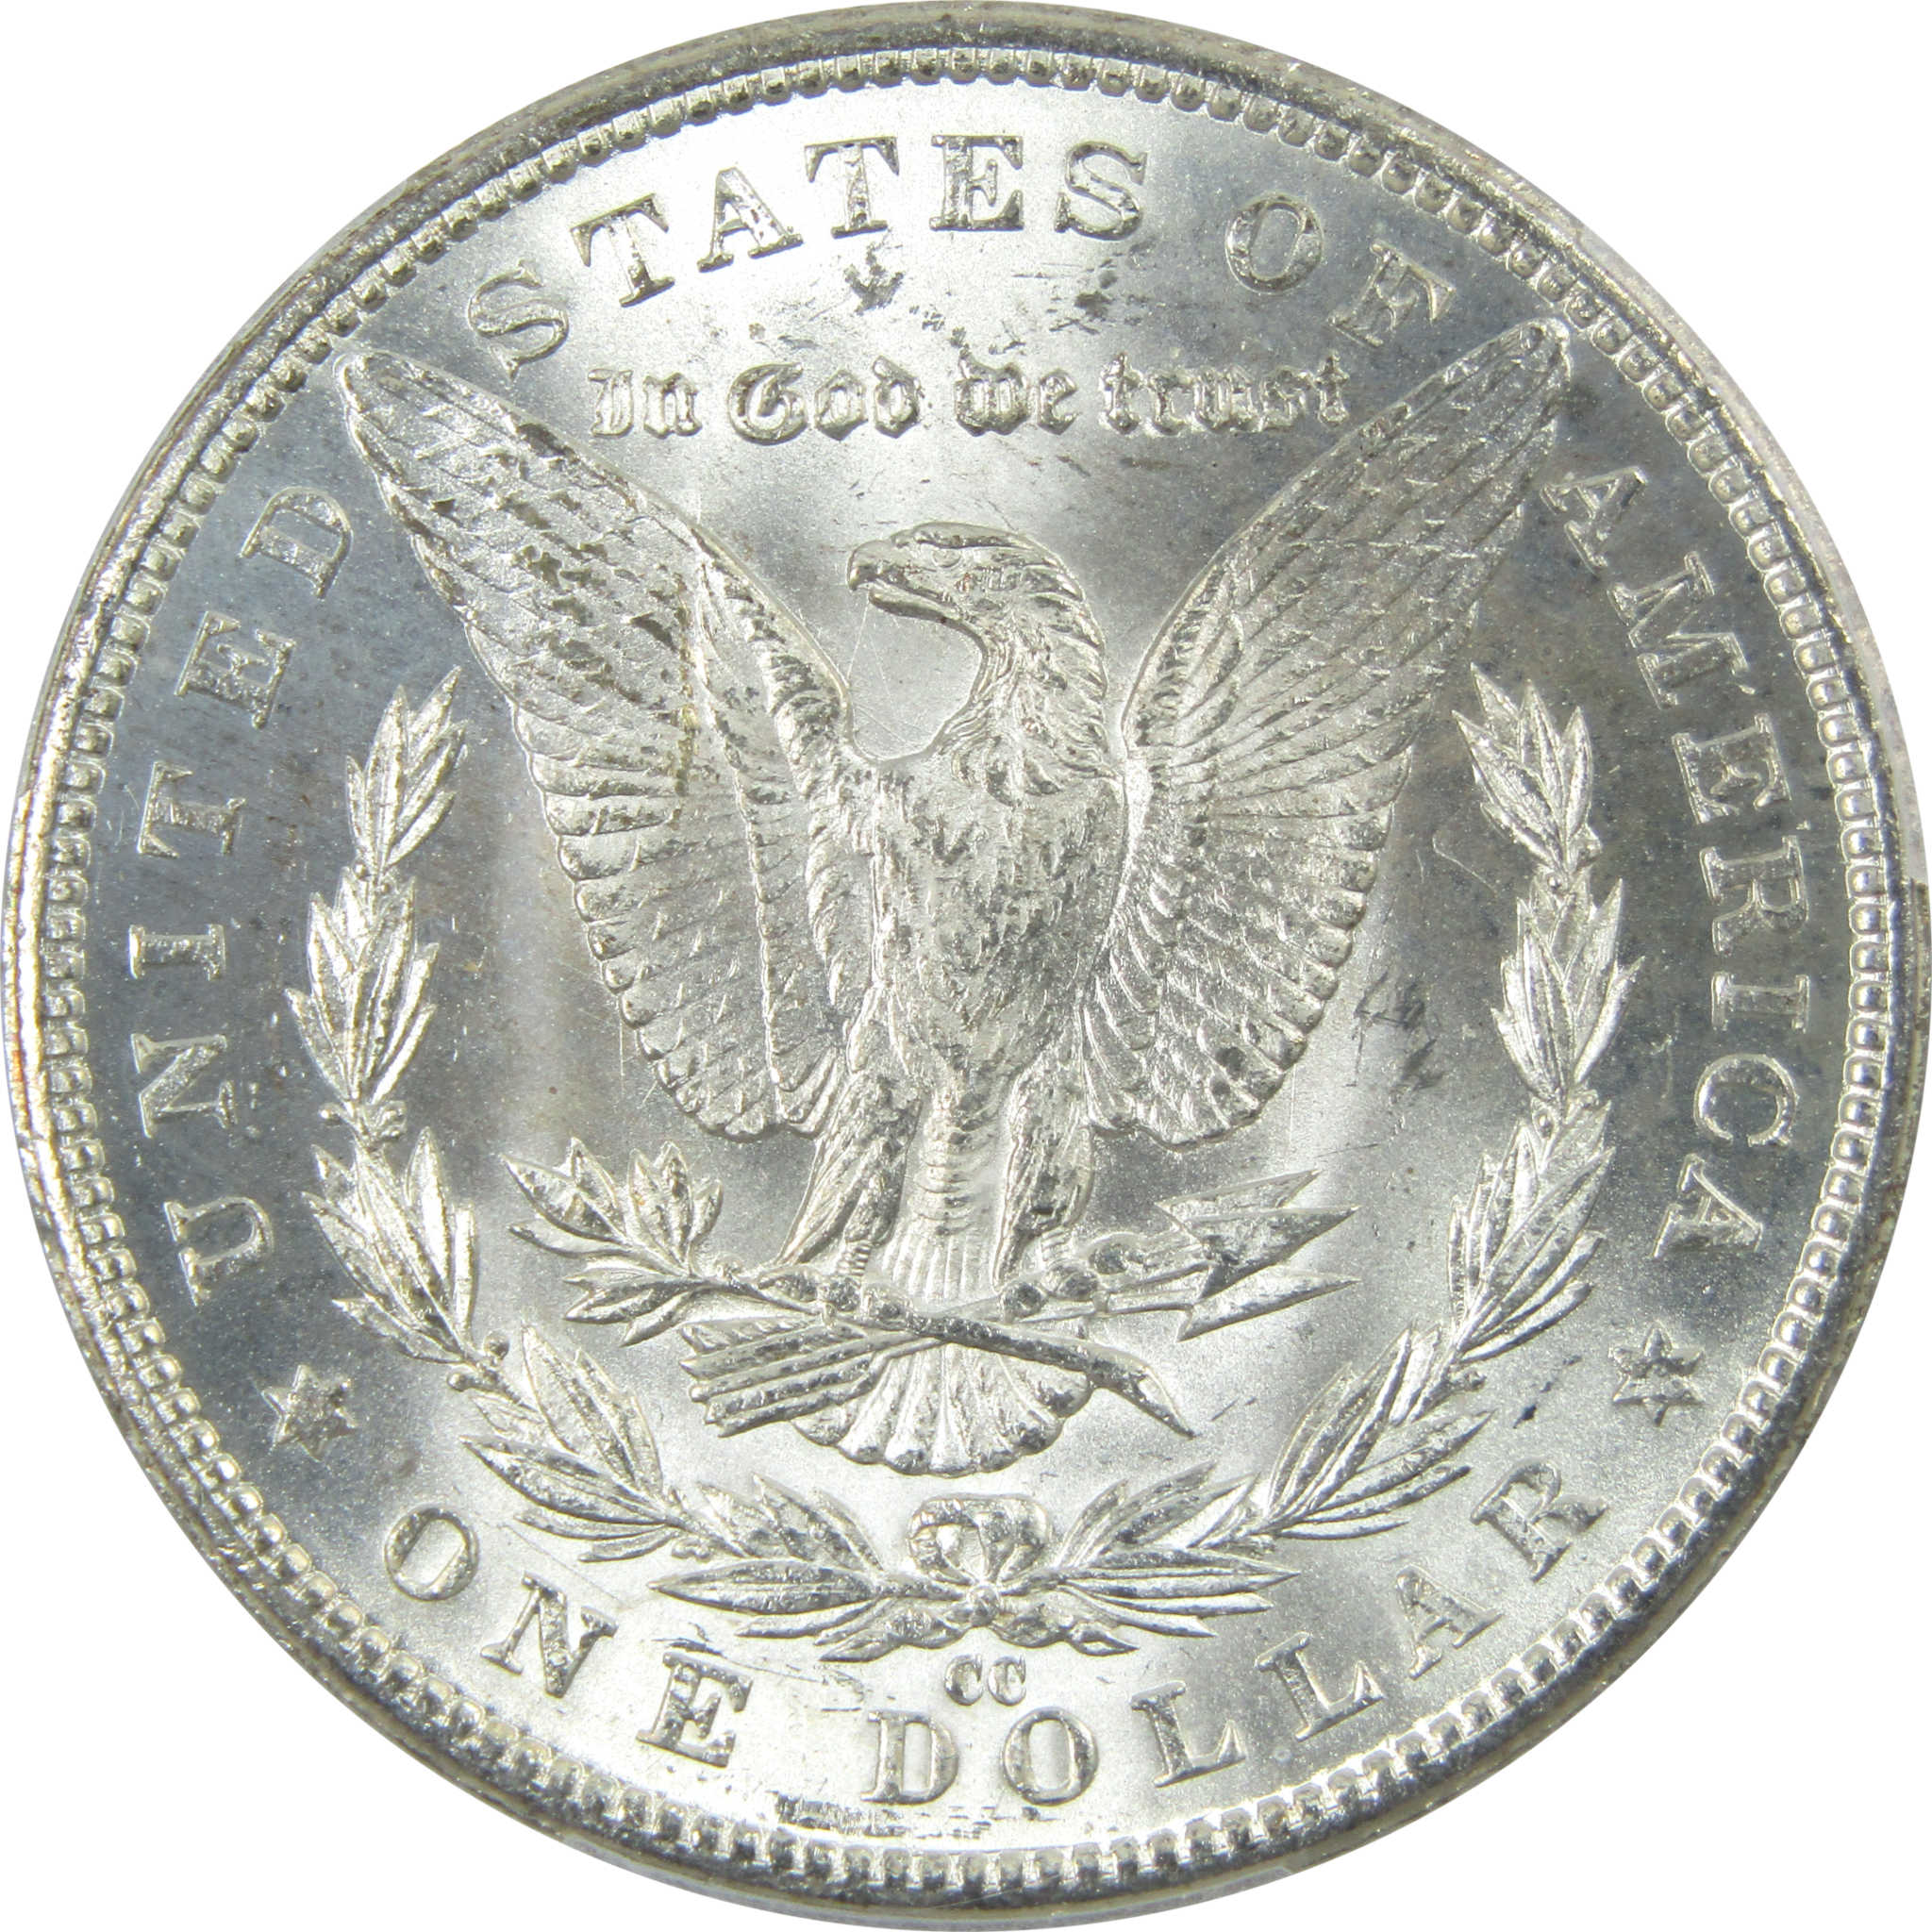 1883 CC Morgan Dollar MS 63 PCGS Silver $1 Uncirculated SKU:I13919 - Morgan coin - Morgan silver dollar - Morgan silver dollar for sale - Profile Coins &amp; Collectibles